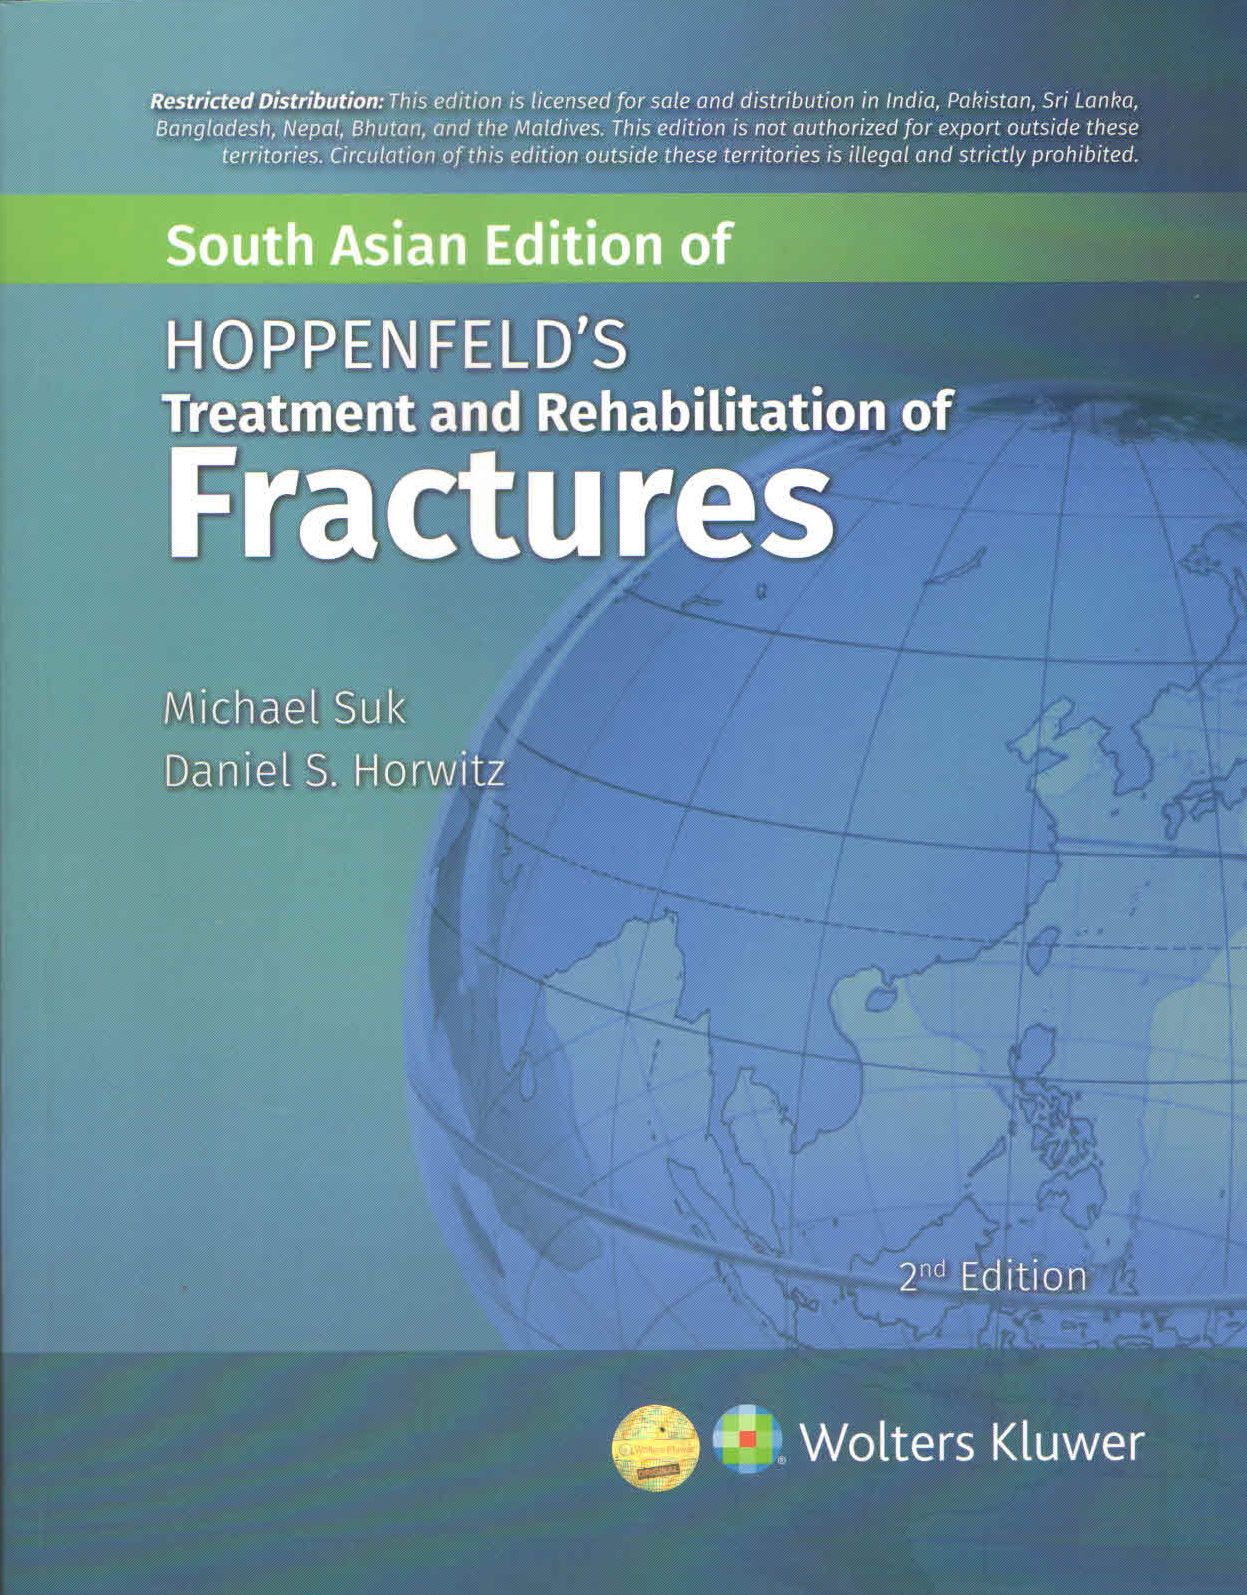 

exclusive-publishers/lww/hoppenfeld-s-treatment-and-rehabilitation-of-fractures-9788119877973